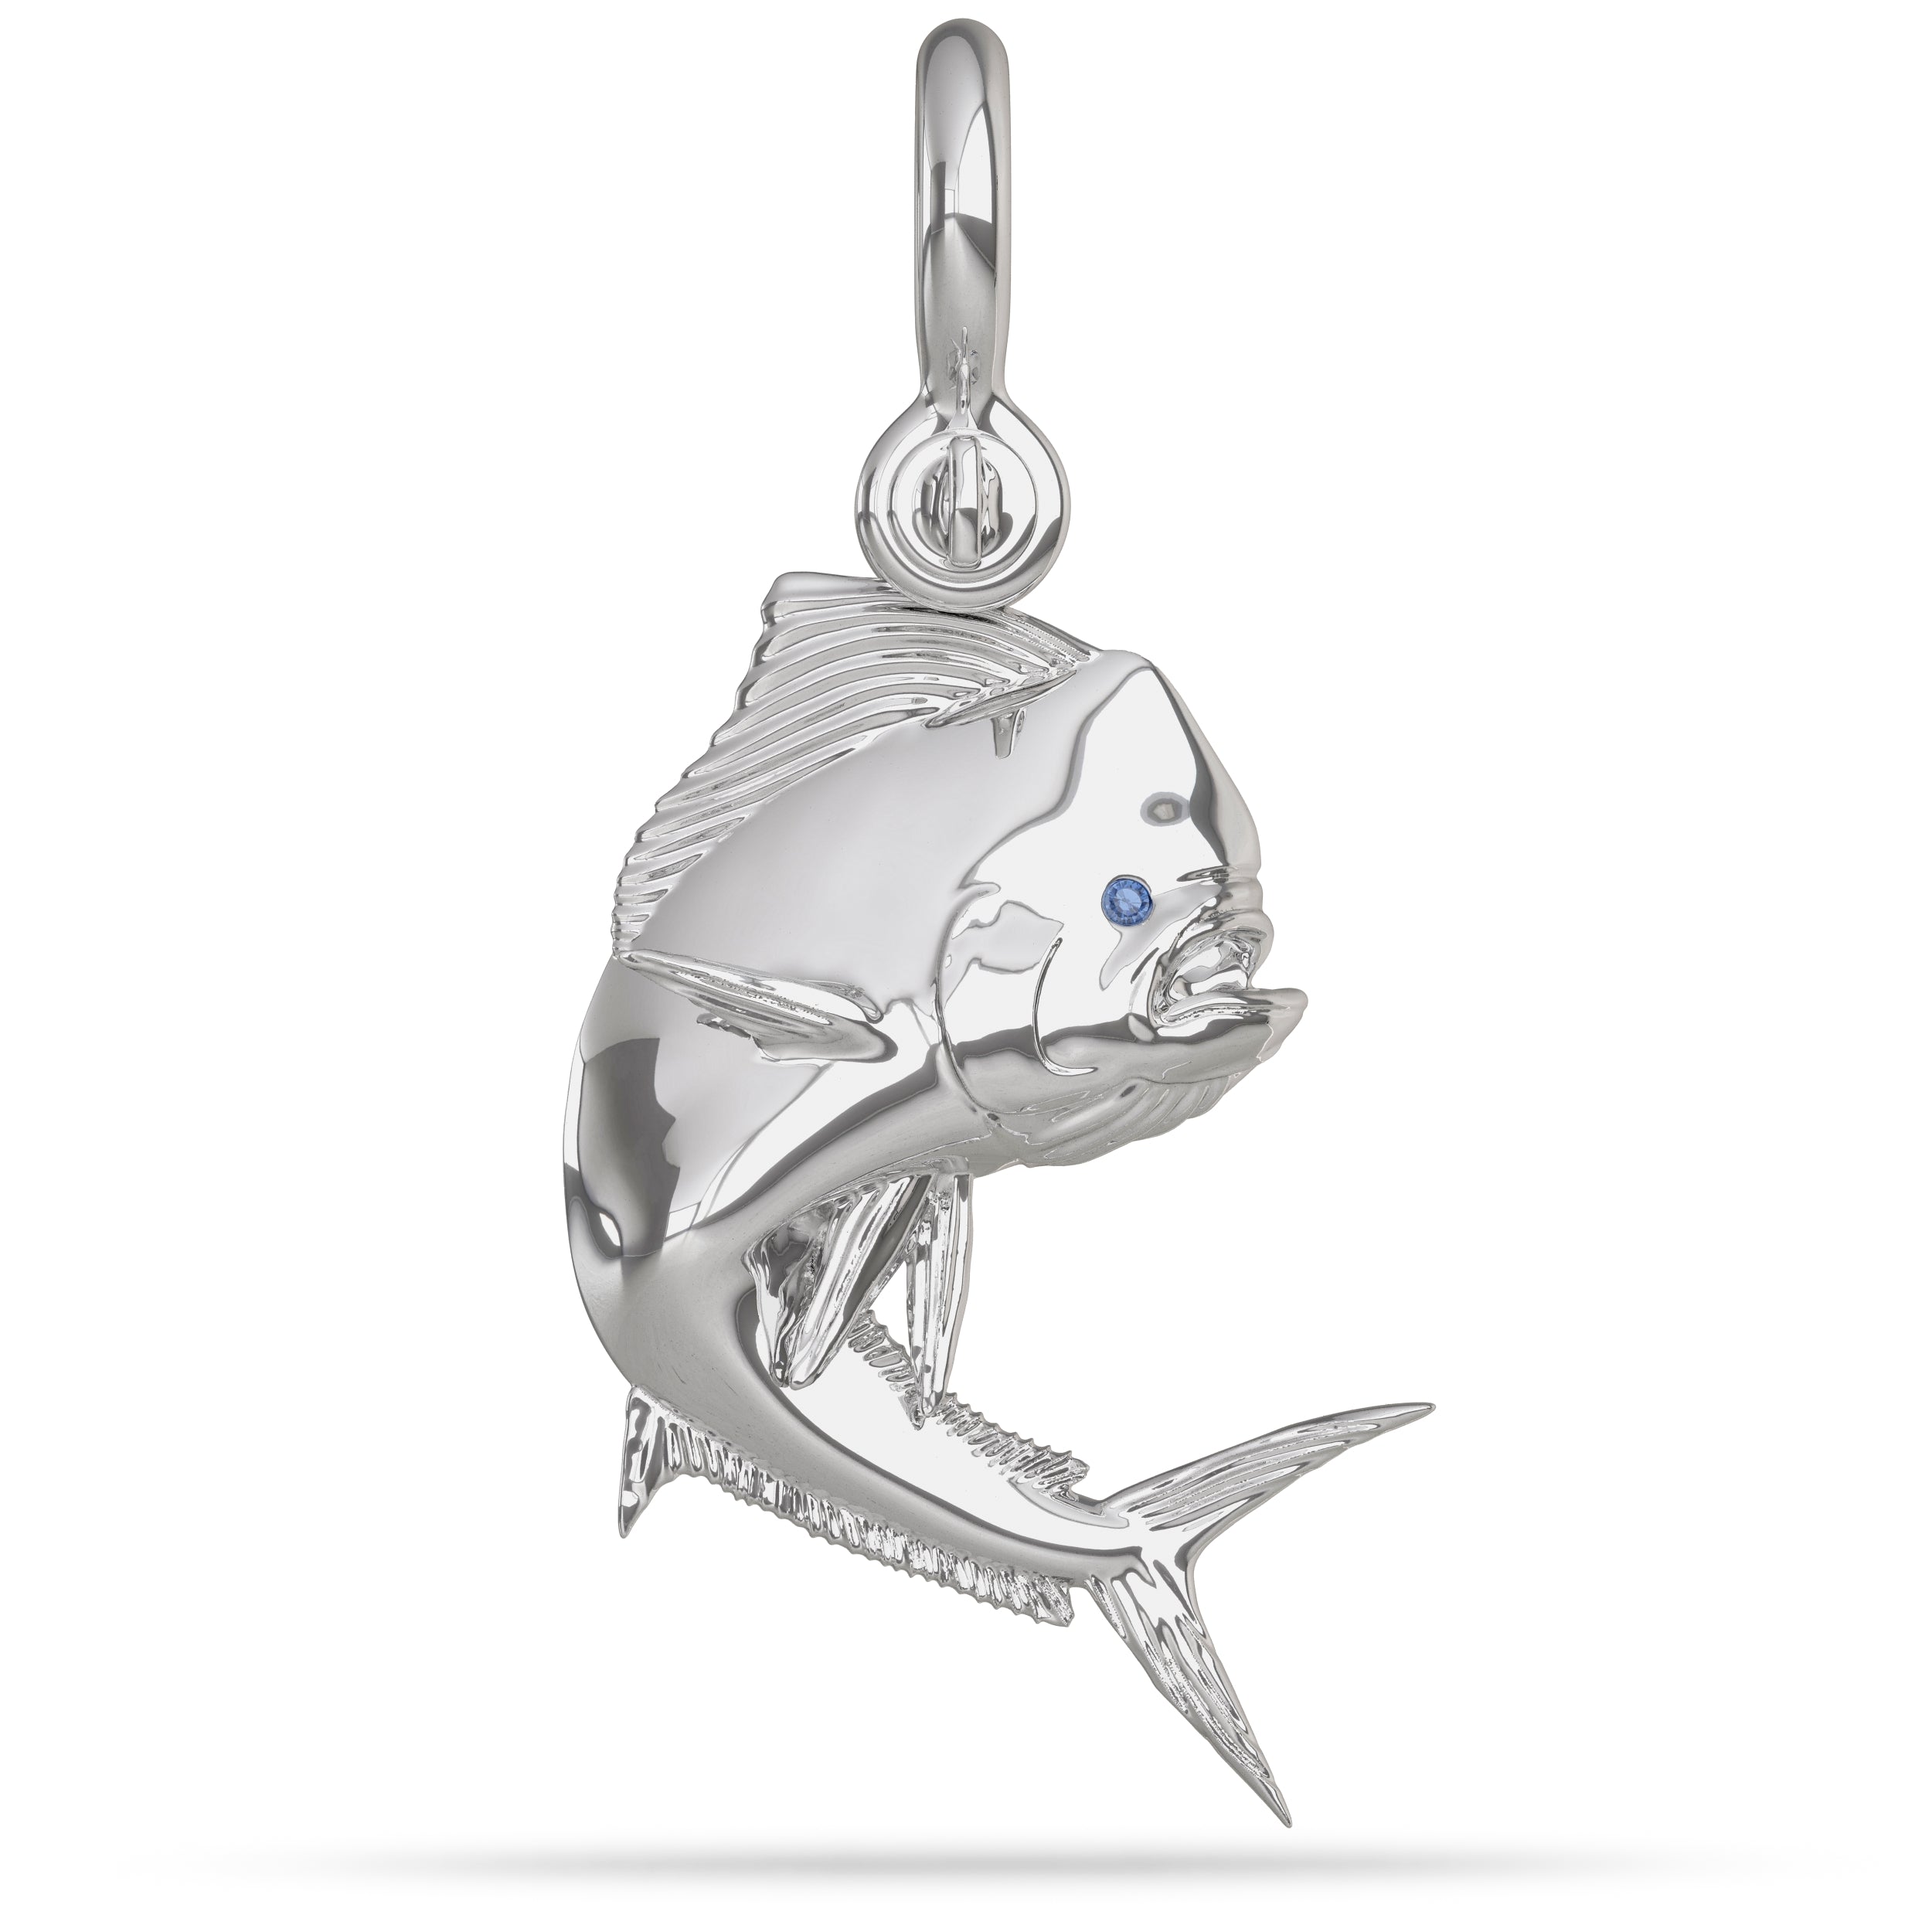 Sterling Silver Mahi Mahi Pendant High Polished Mirror Finish With Blue Sapphire Eye with A Mariner Shackle Bail Custom Designed By Nautical Treasure Jewelry In The Florida Keys 